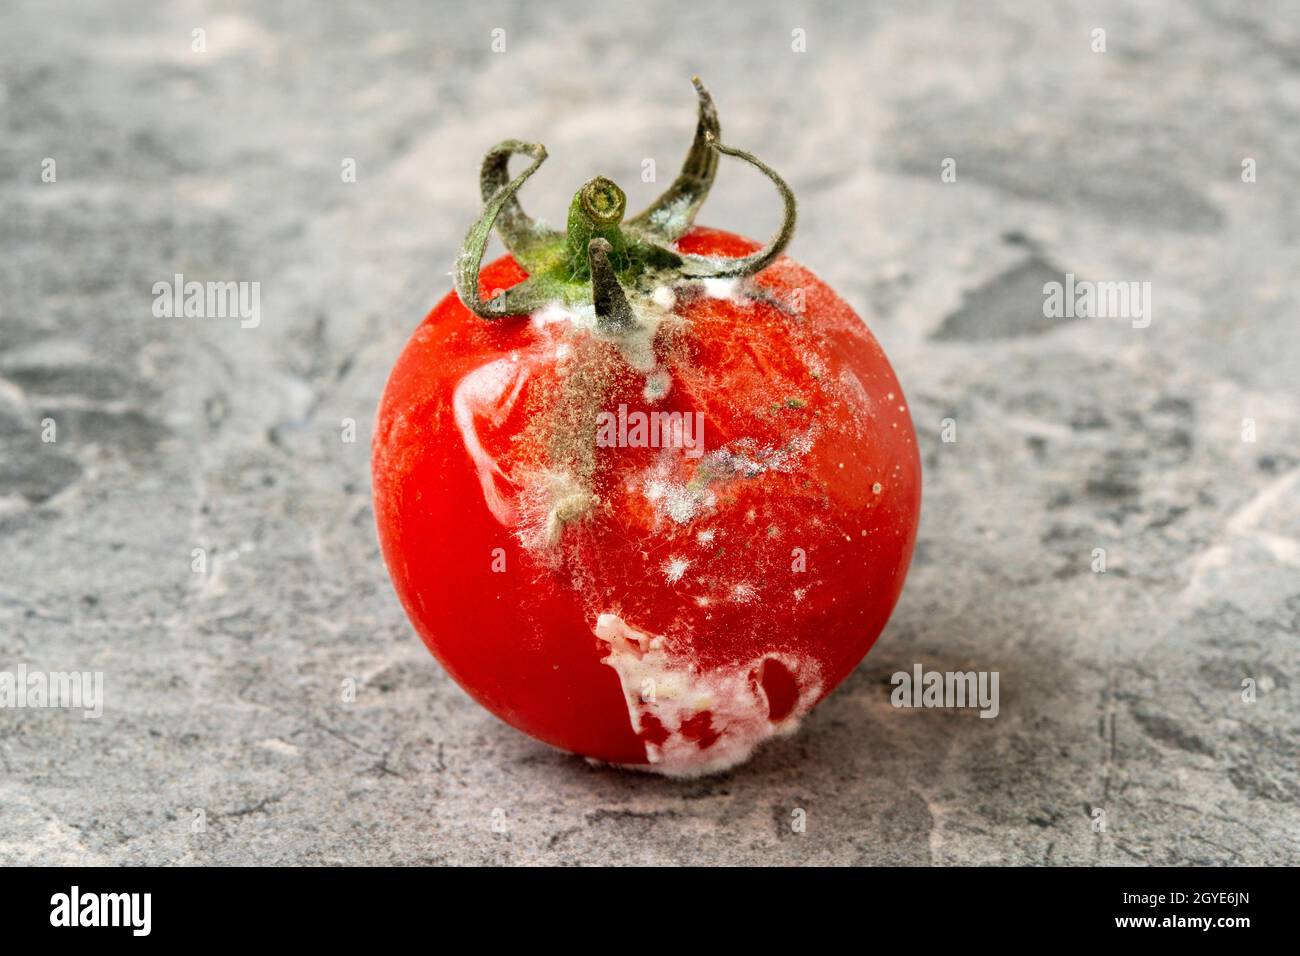 Rotten tomato. Mold on vegetables. Rotten product. Spoiled food.  Tomato with mold on the stone background. Mold fungus. Stock Photo